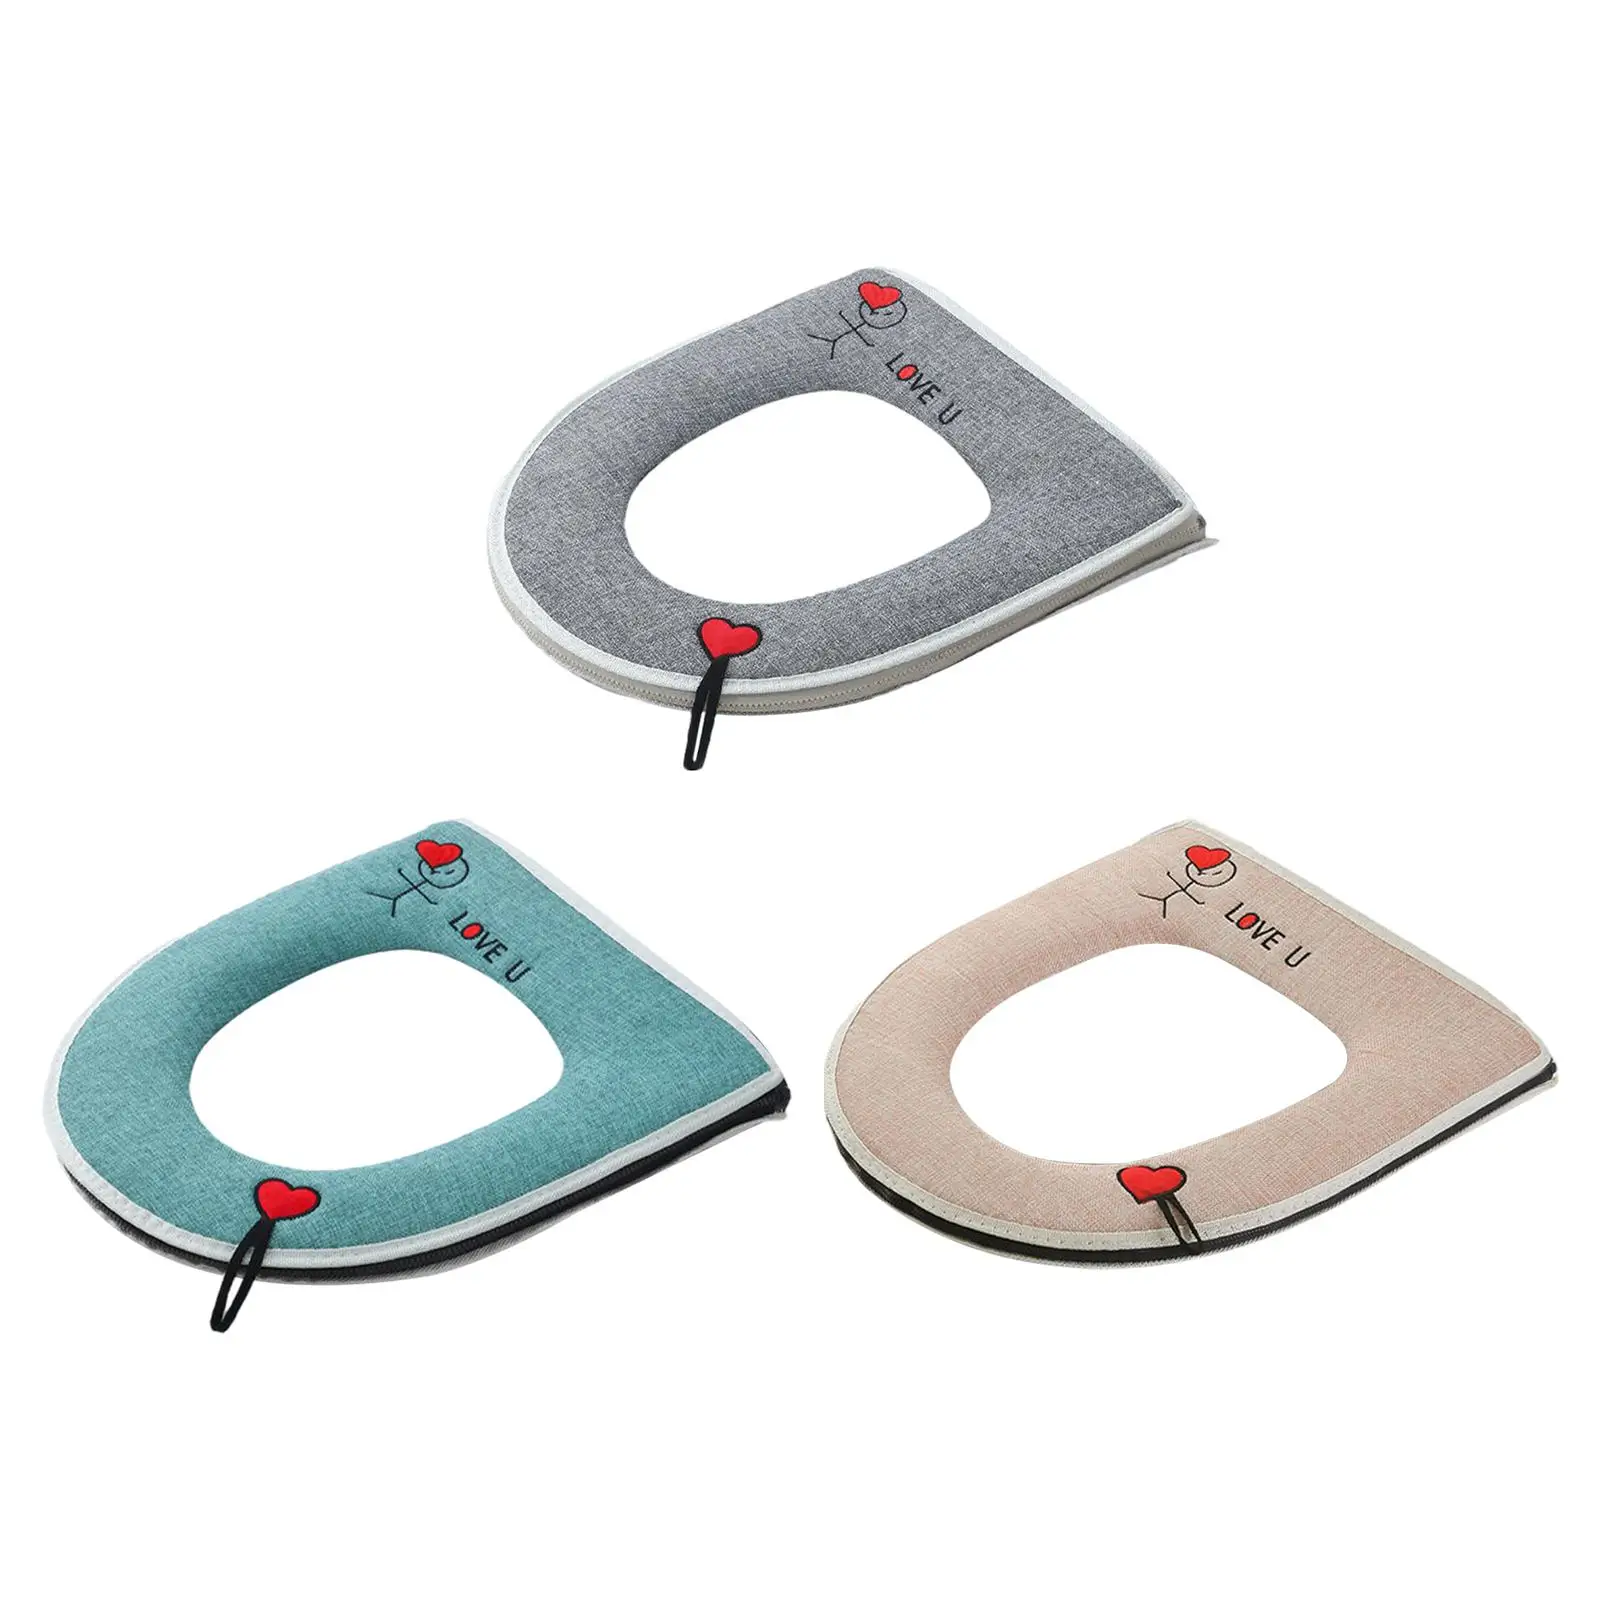 Thicken Toilet Seat Cushion Portable Foldable Comfortable Easy Installation Toilet Seat Cover Pads for Bathroom Household Hotel